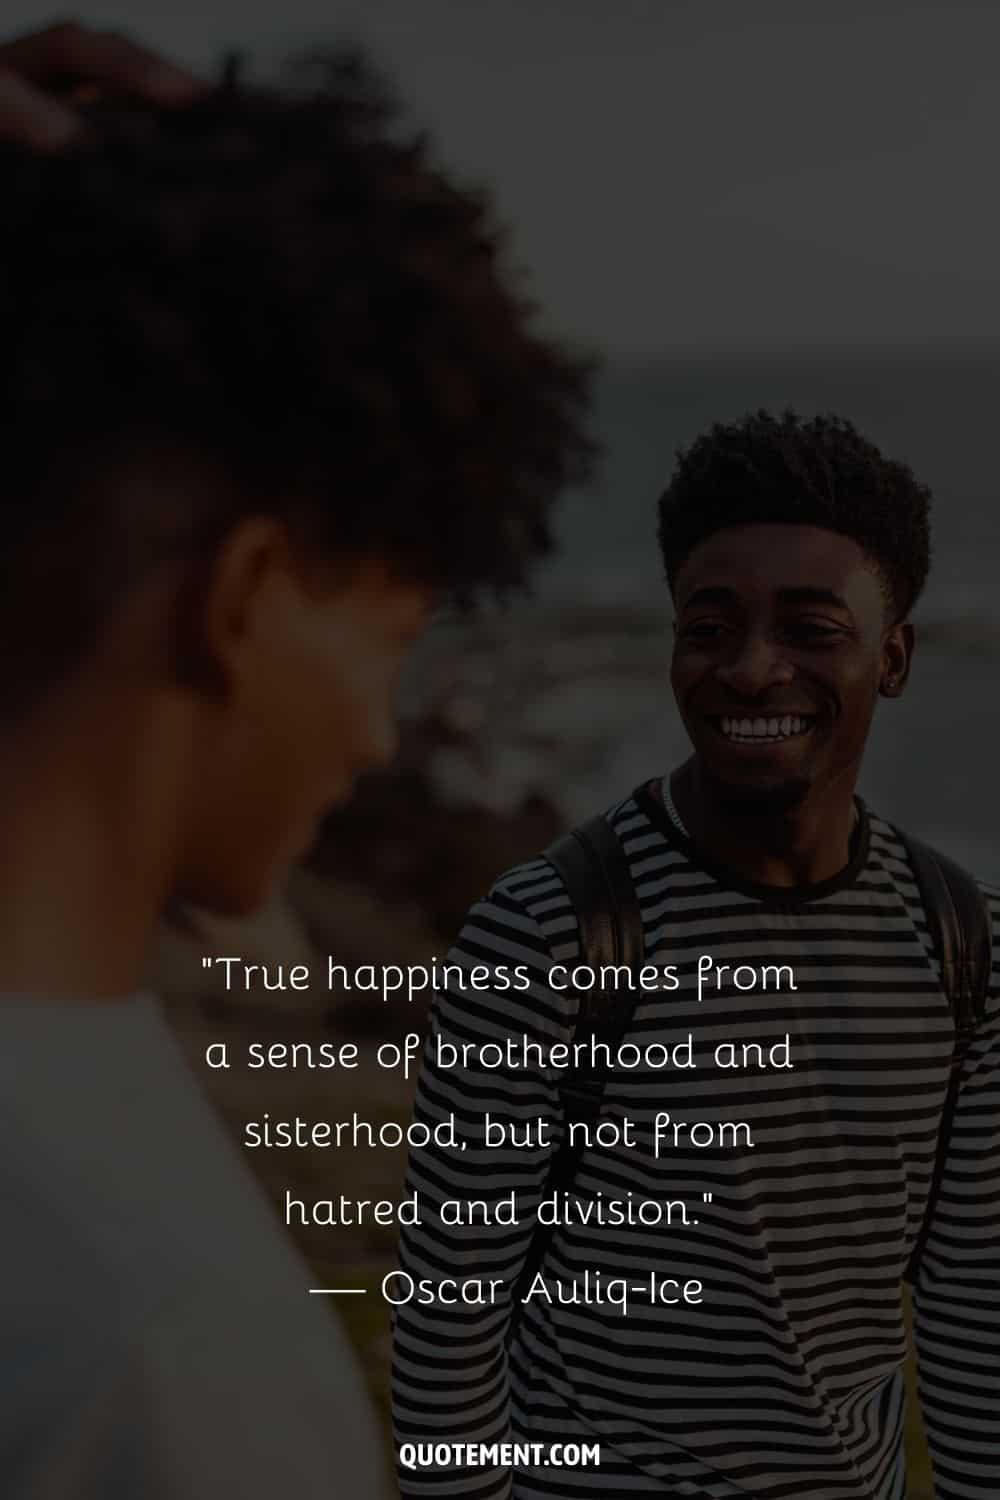 “True happiness comes from a sense of brotherhood and sisterhood, but not from hatred and division.” — Oscar Auliq-Ice